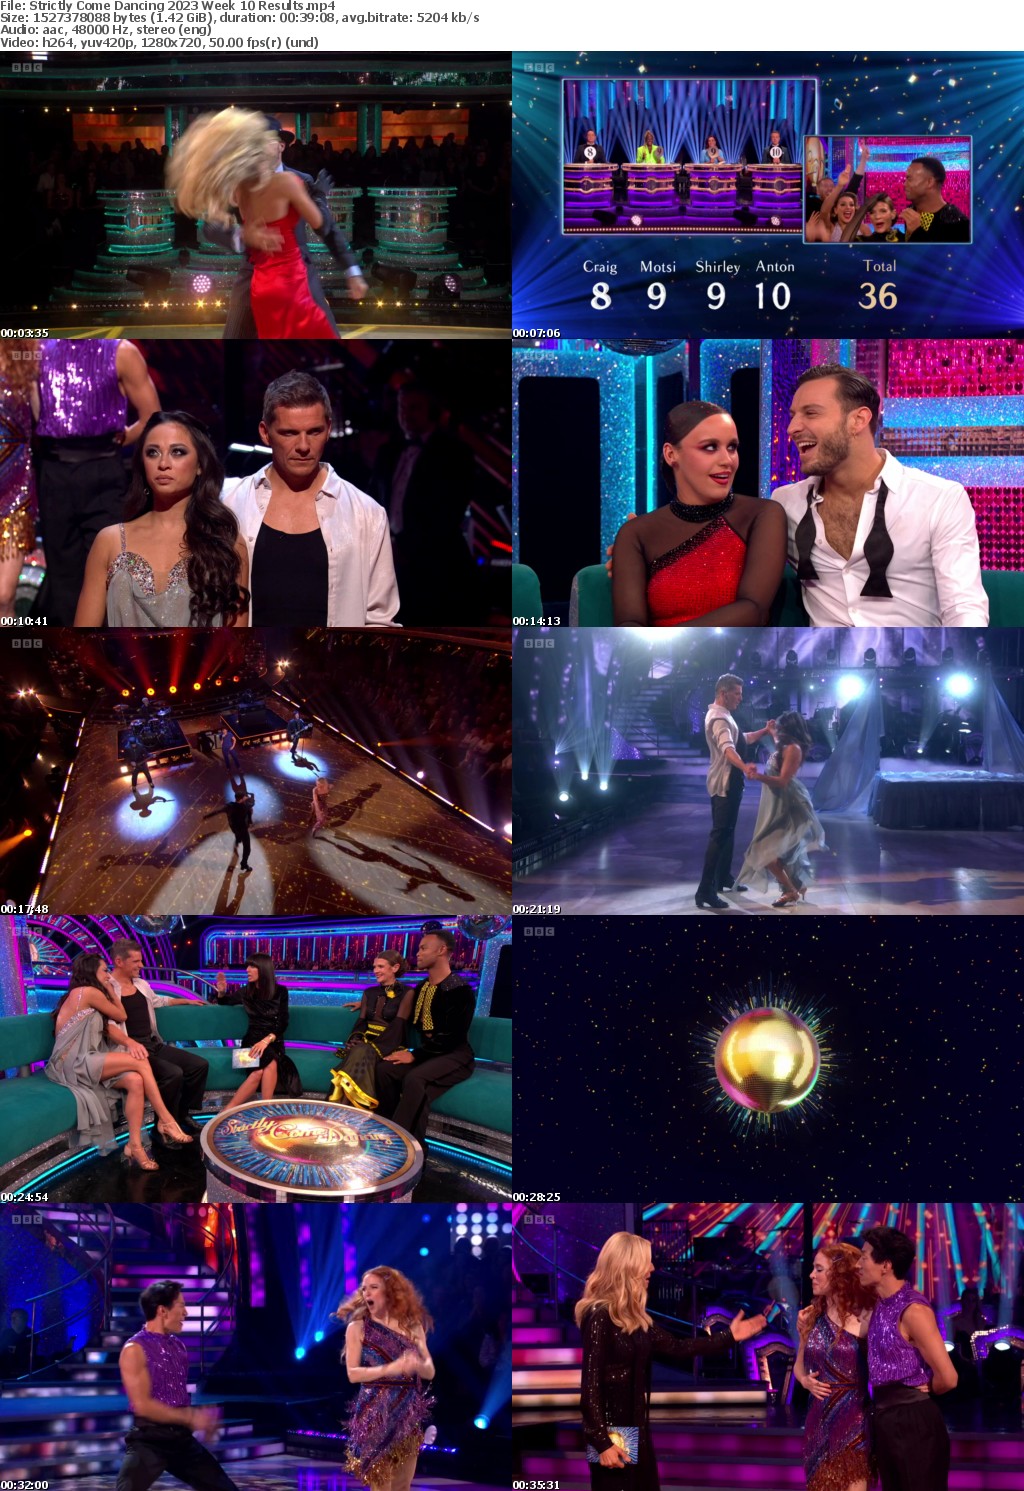 Strictly Come Dancing 2023 Week 10 Results (1280x720p HD, 50fps, soft Eng subs)